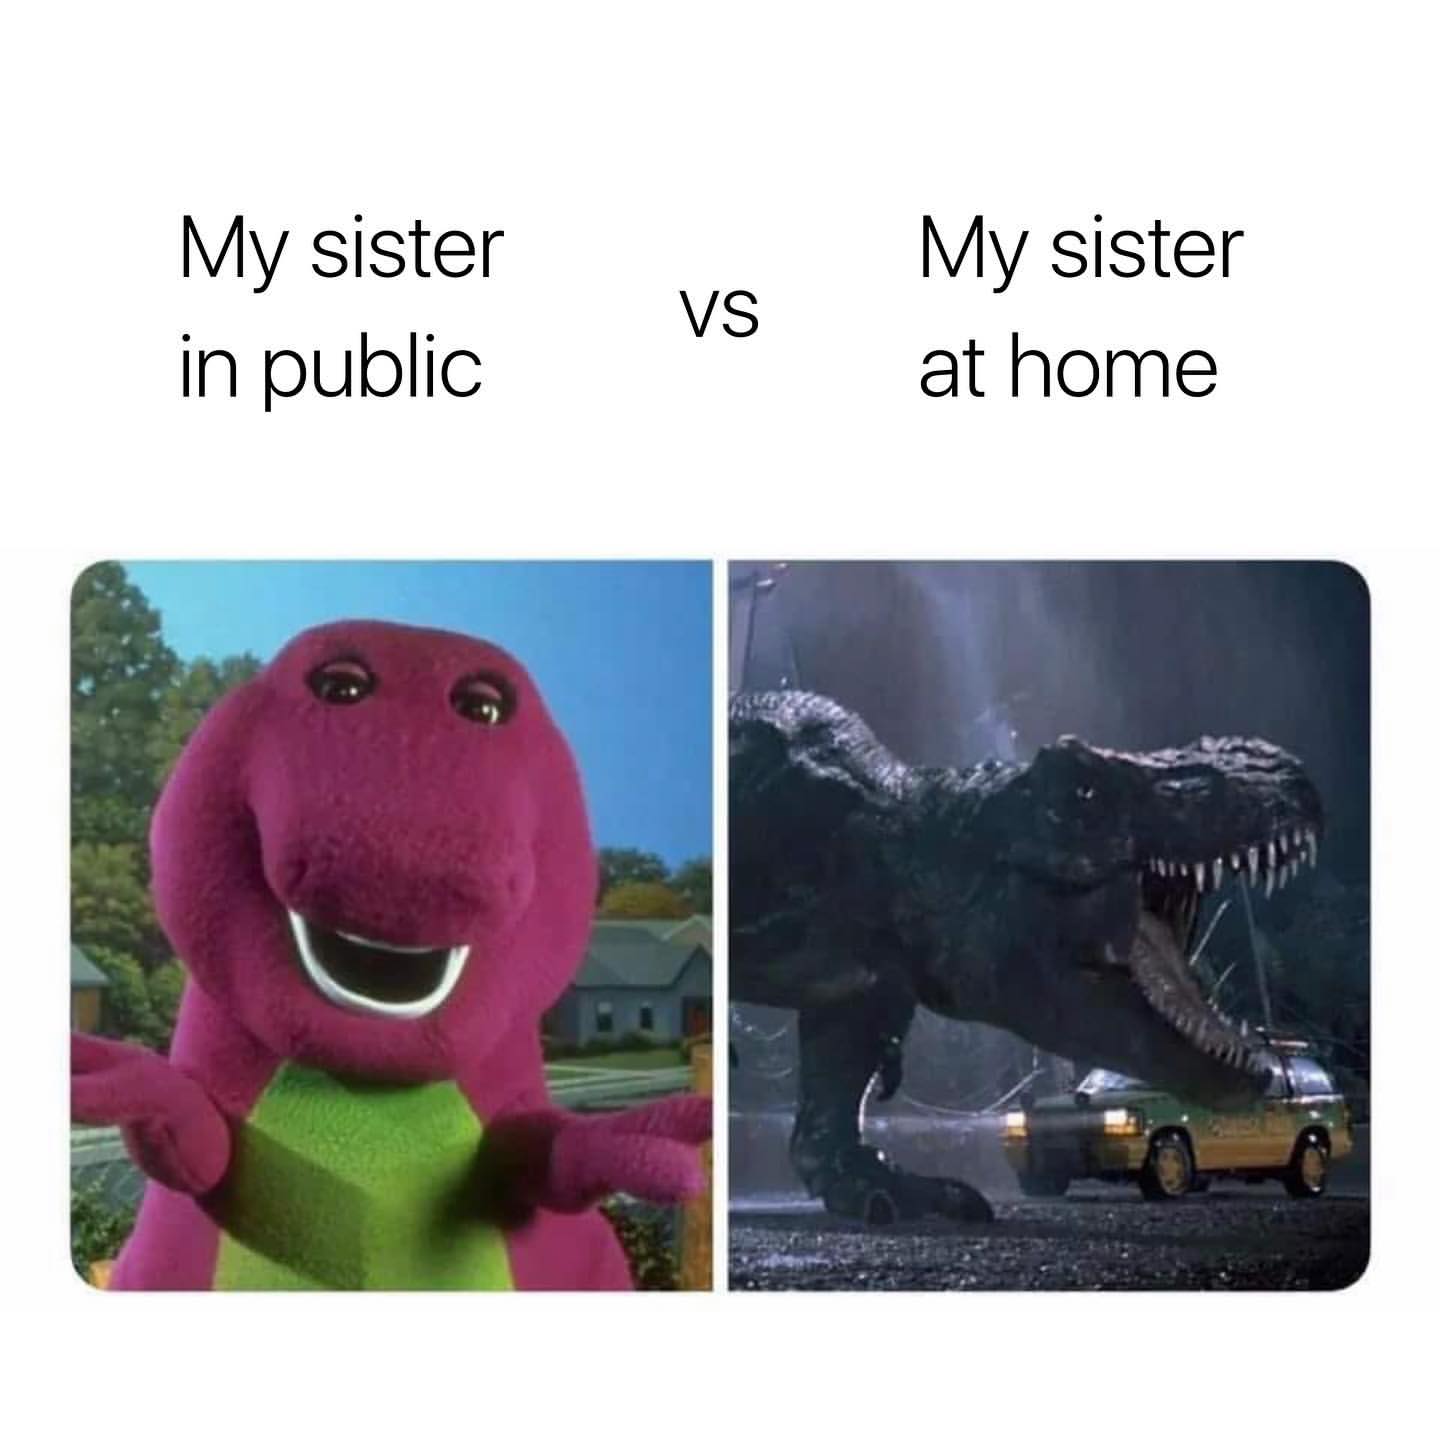 My sister in public. vs My sister at home.